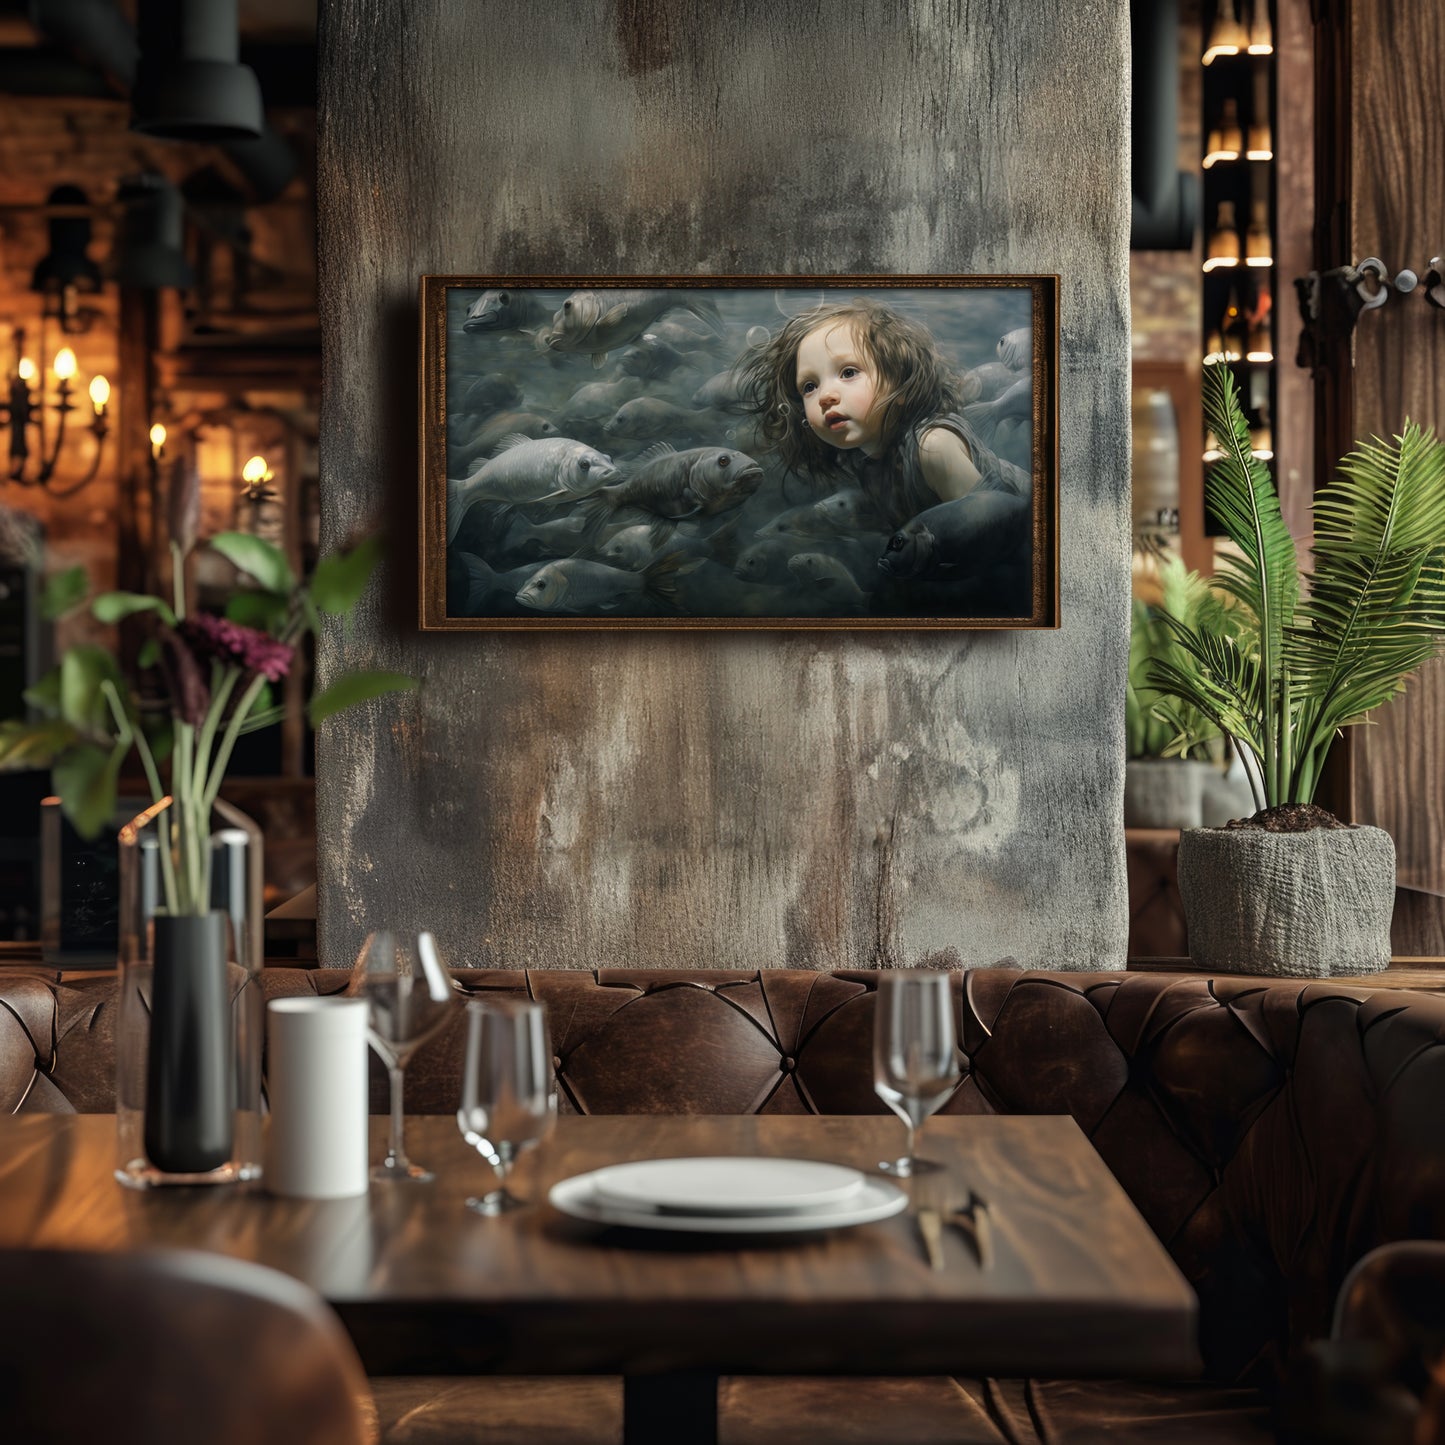 Art print showcasing a young child in a surreal underwater setting, surrounded by fish. This fine art print captures a dreamy, timeless scene.